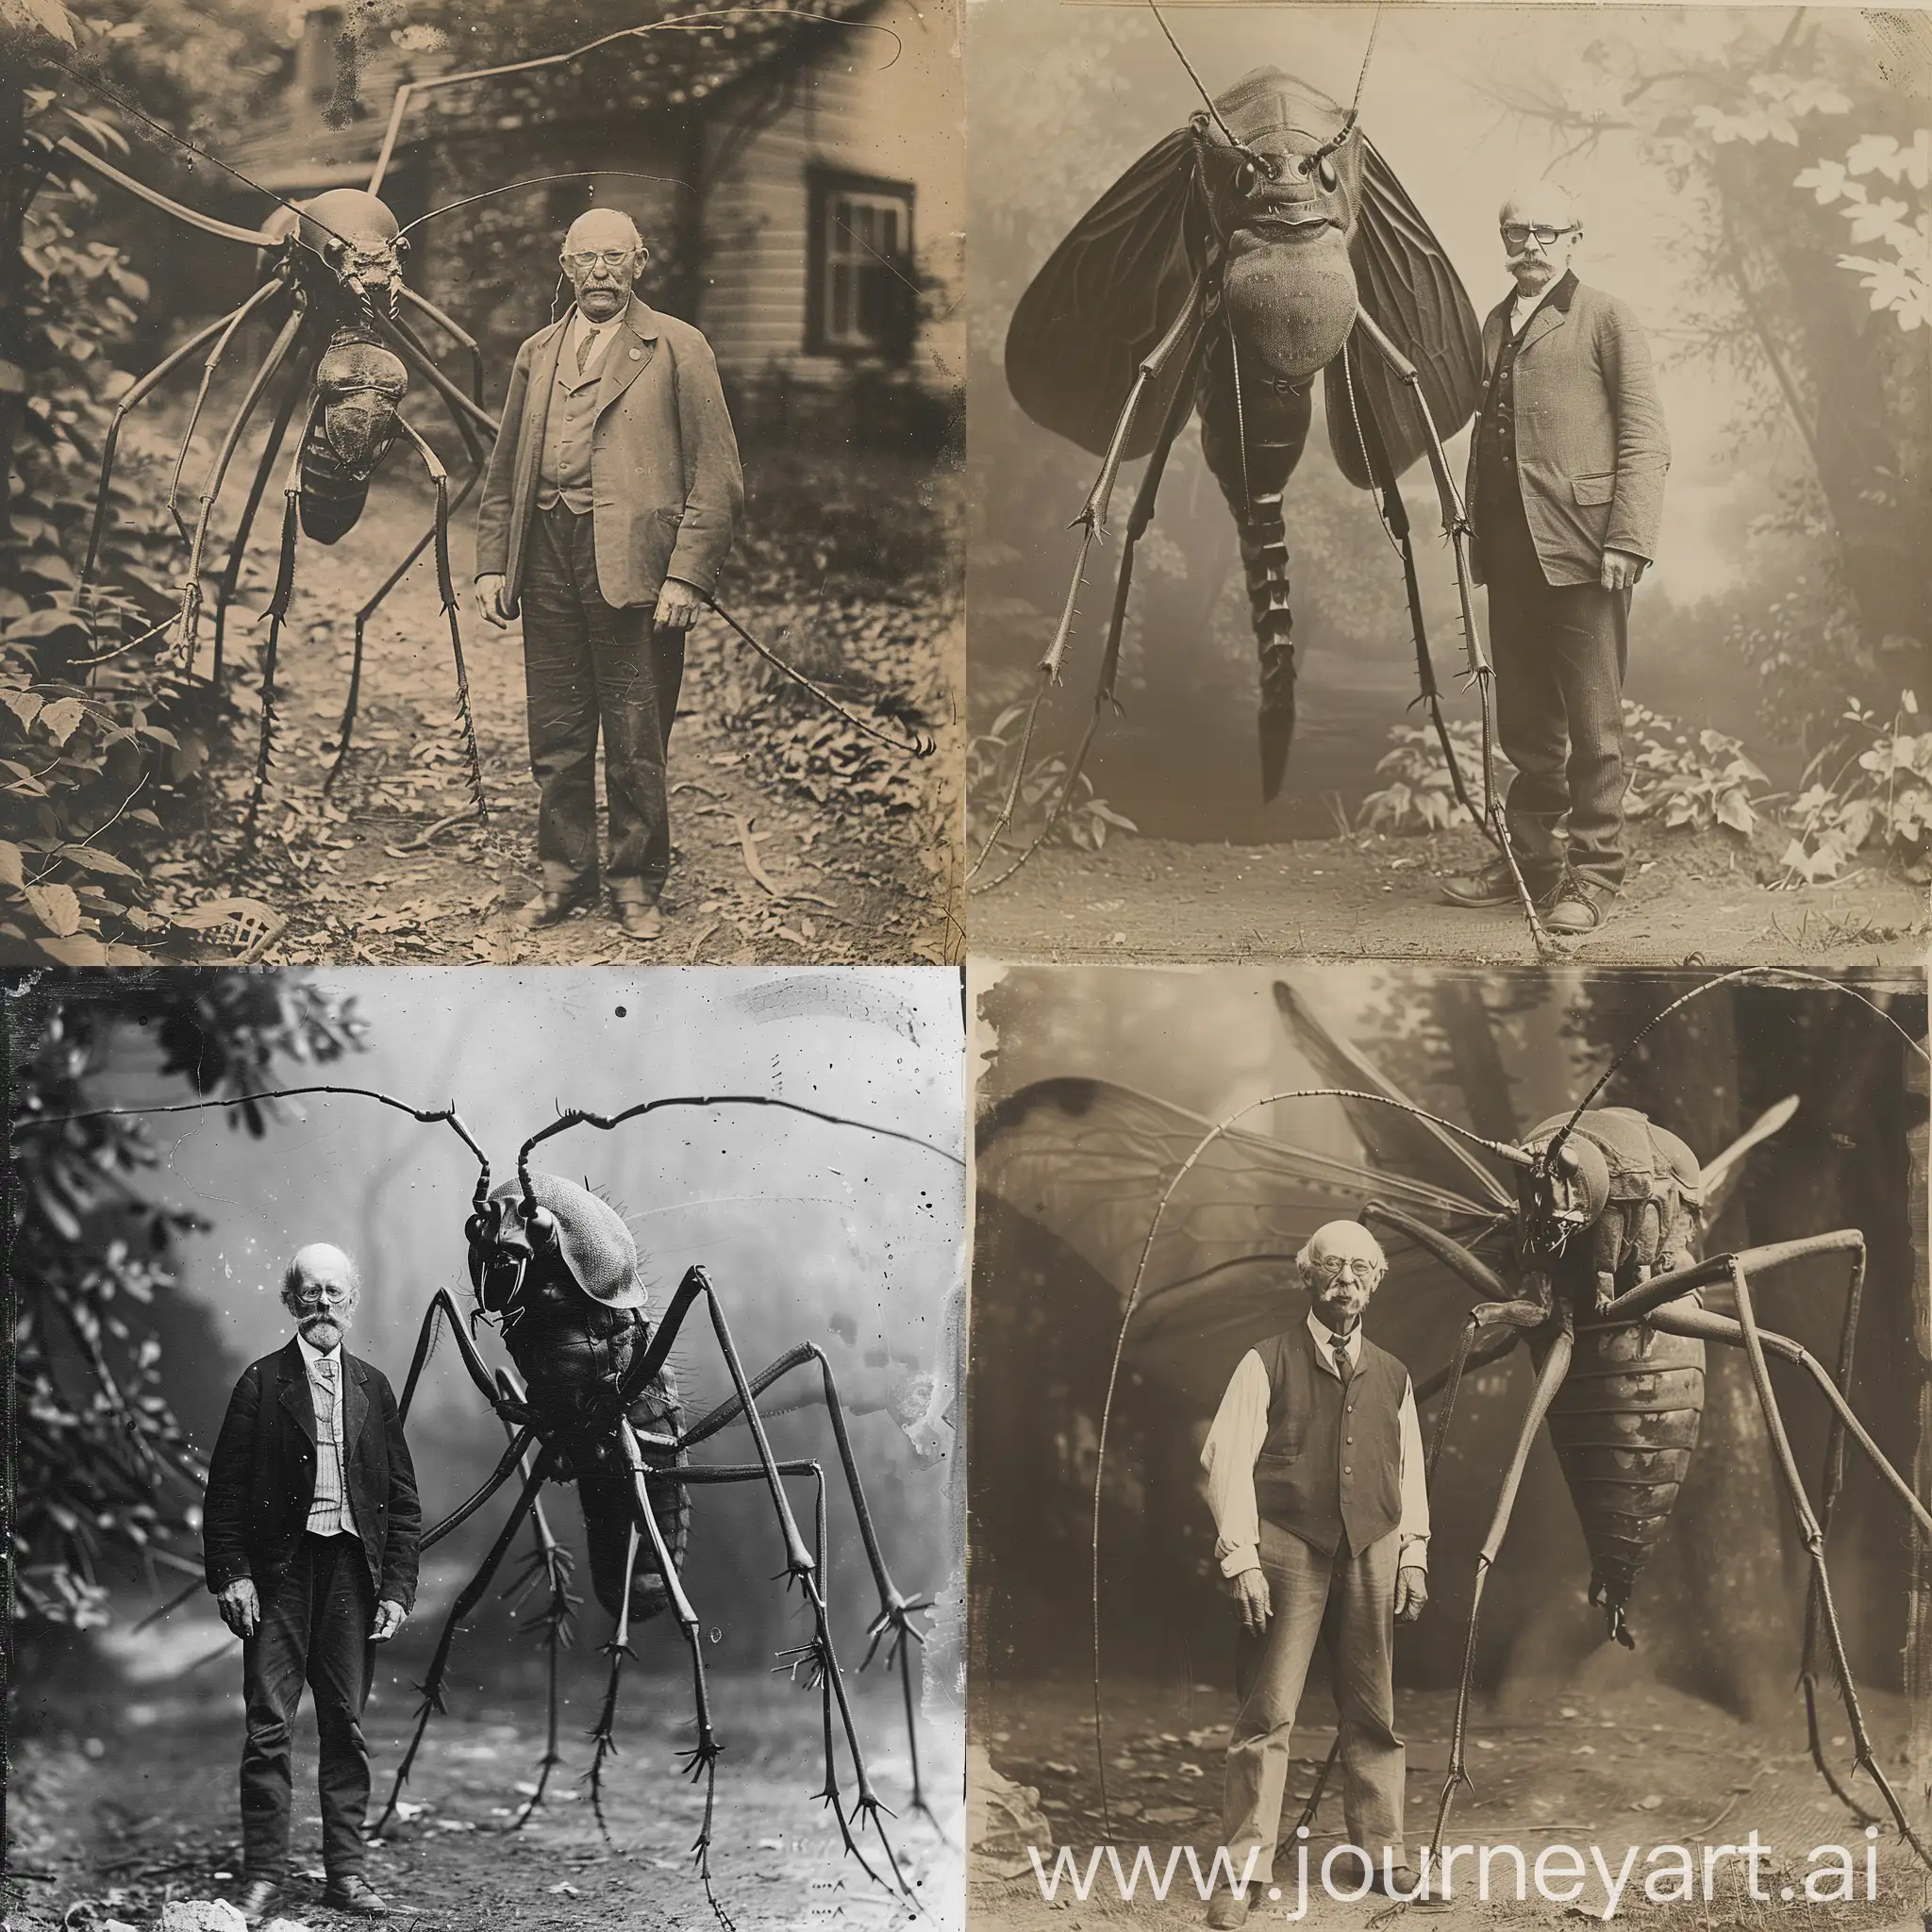 Vintage-Scientist-with-Alien-Creature-in-19th-Century-Setting